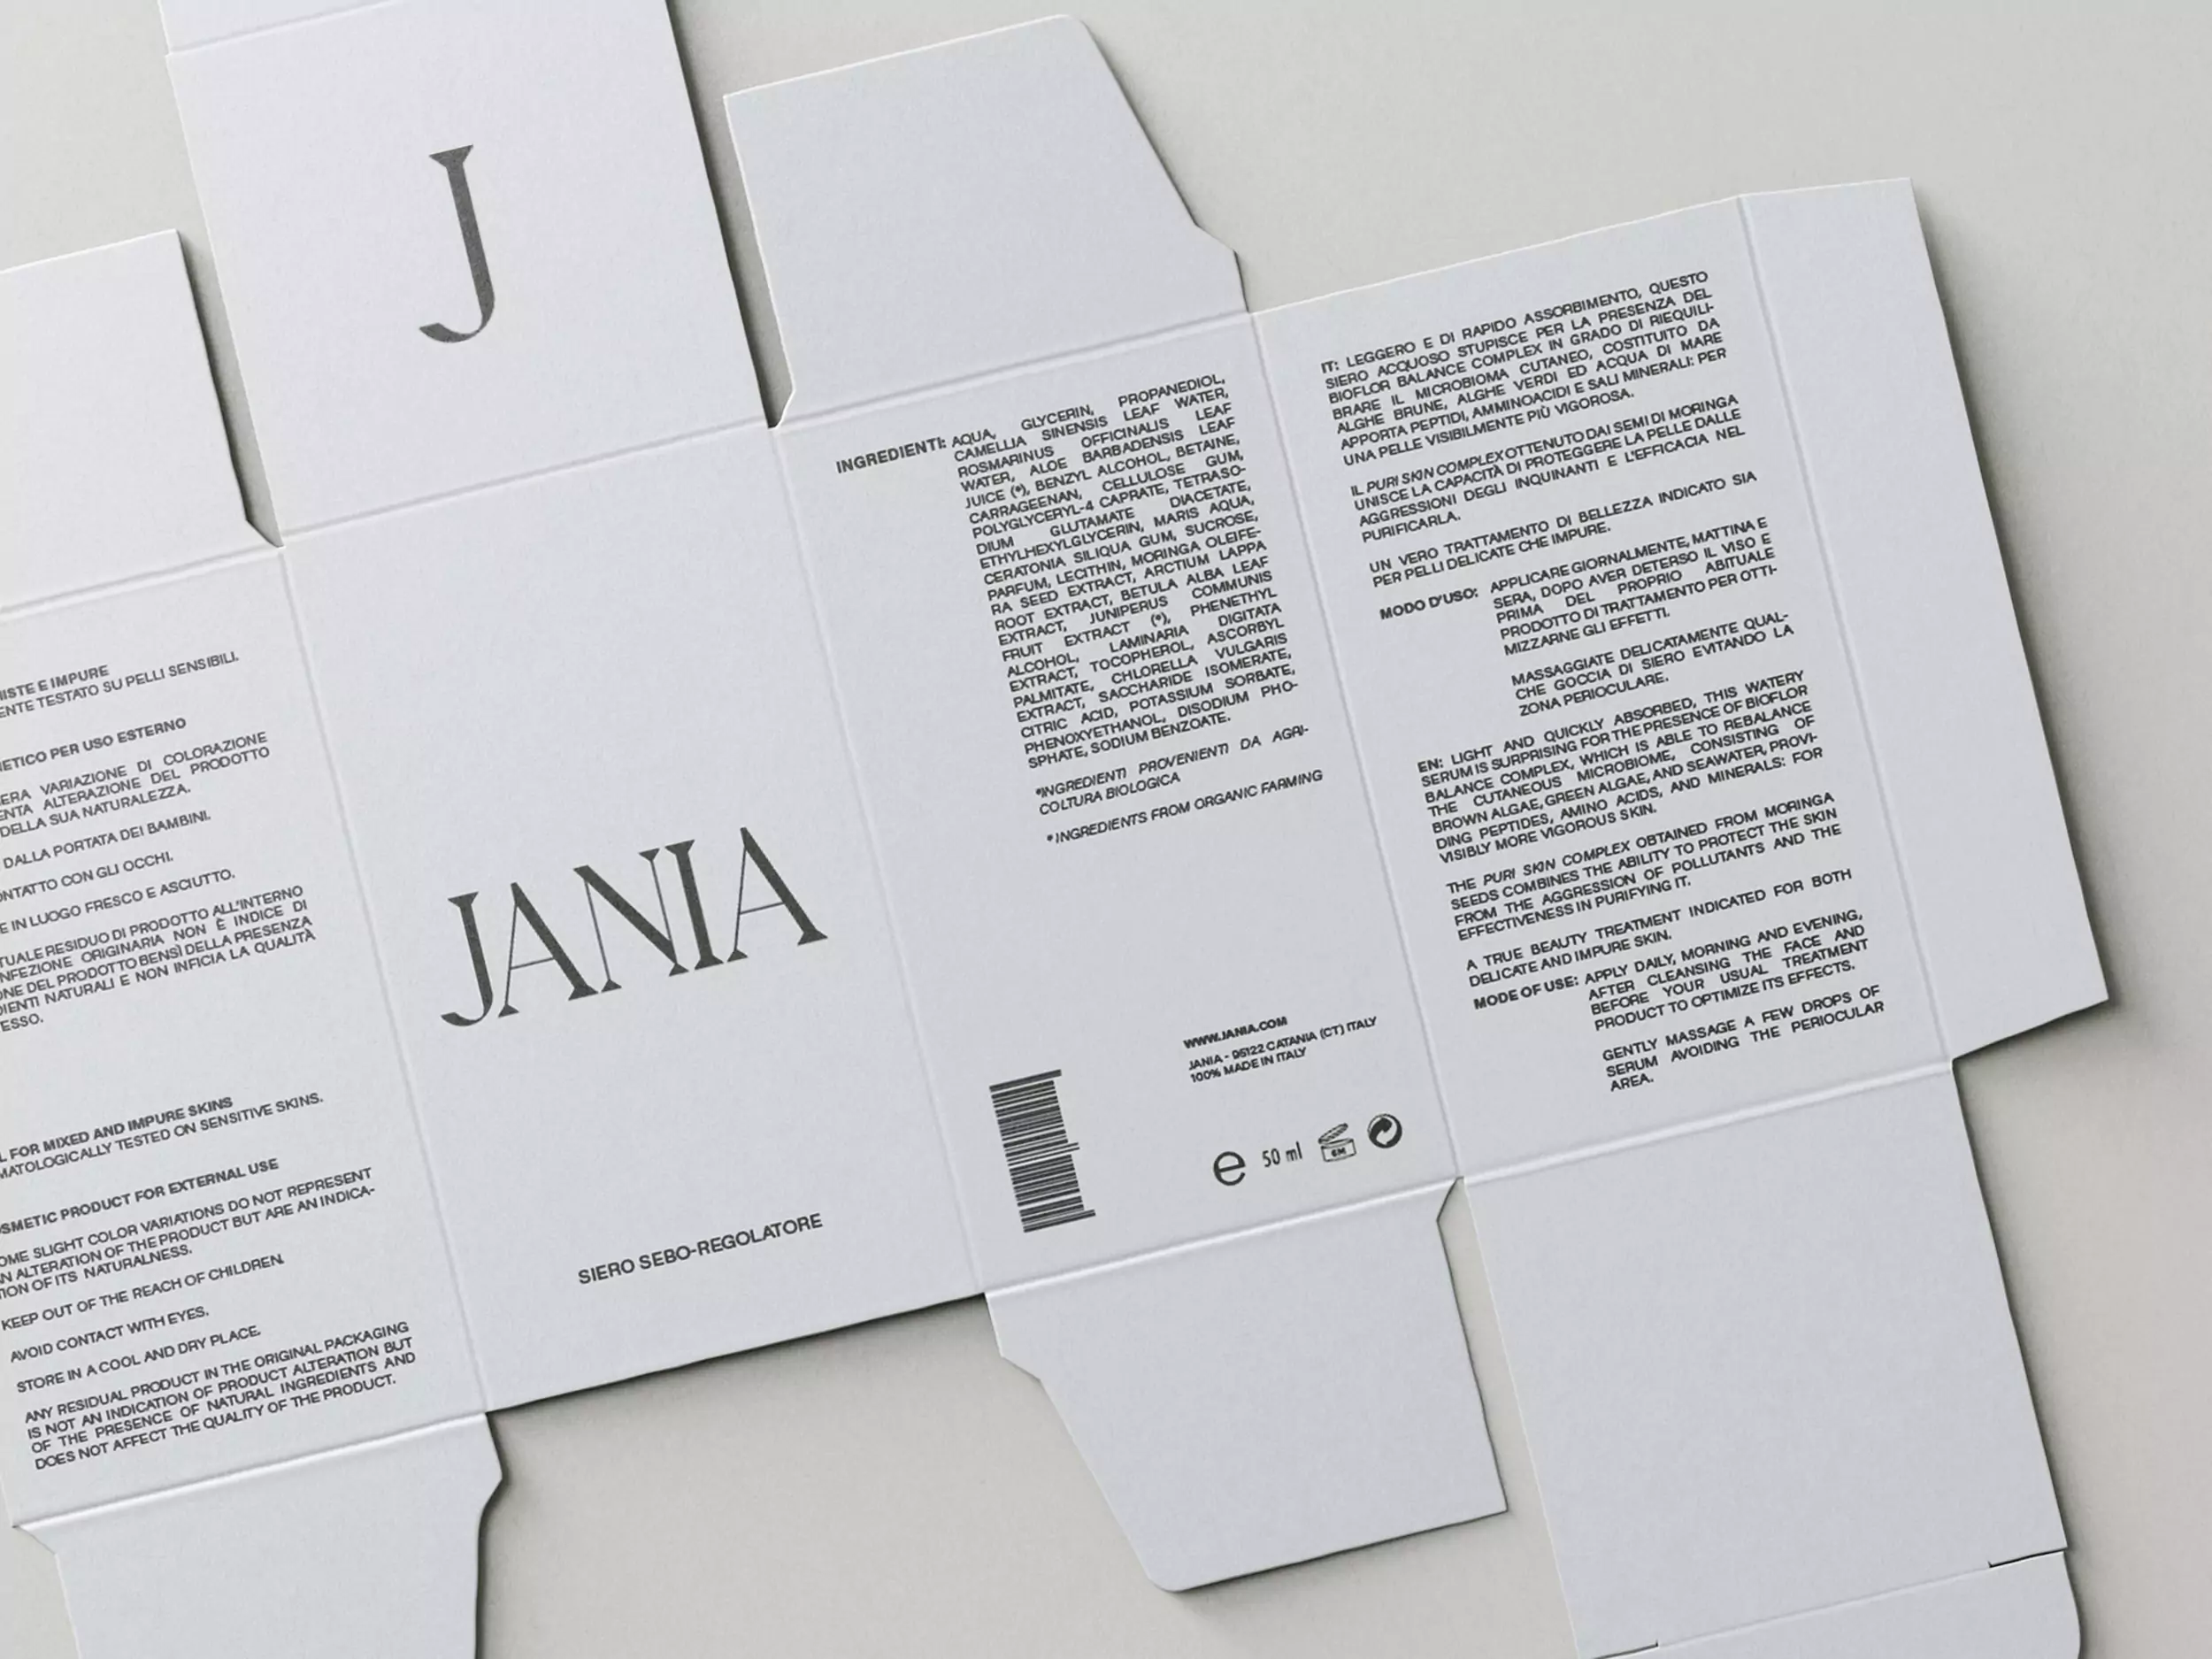 Brand Identity for Jania - Packaging Design Details